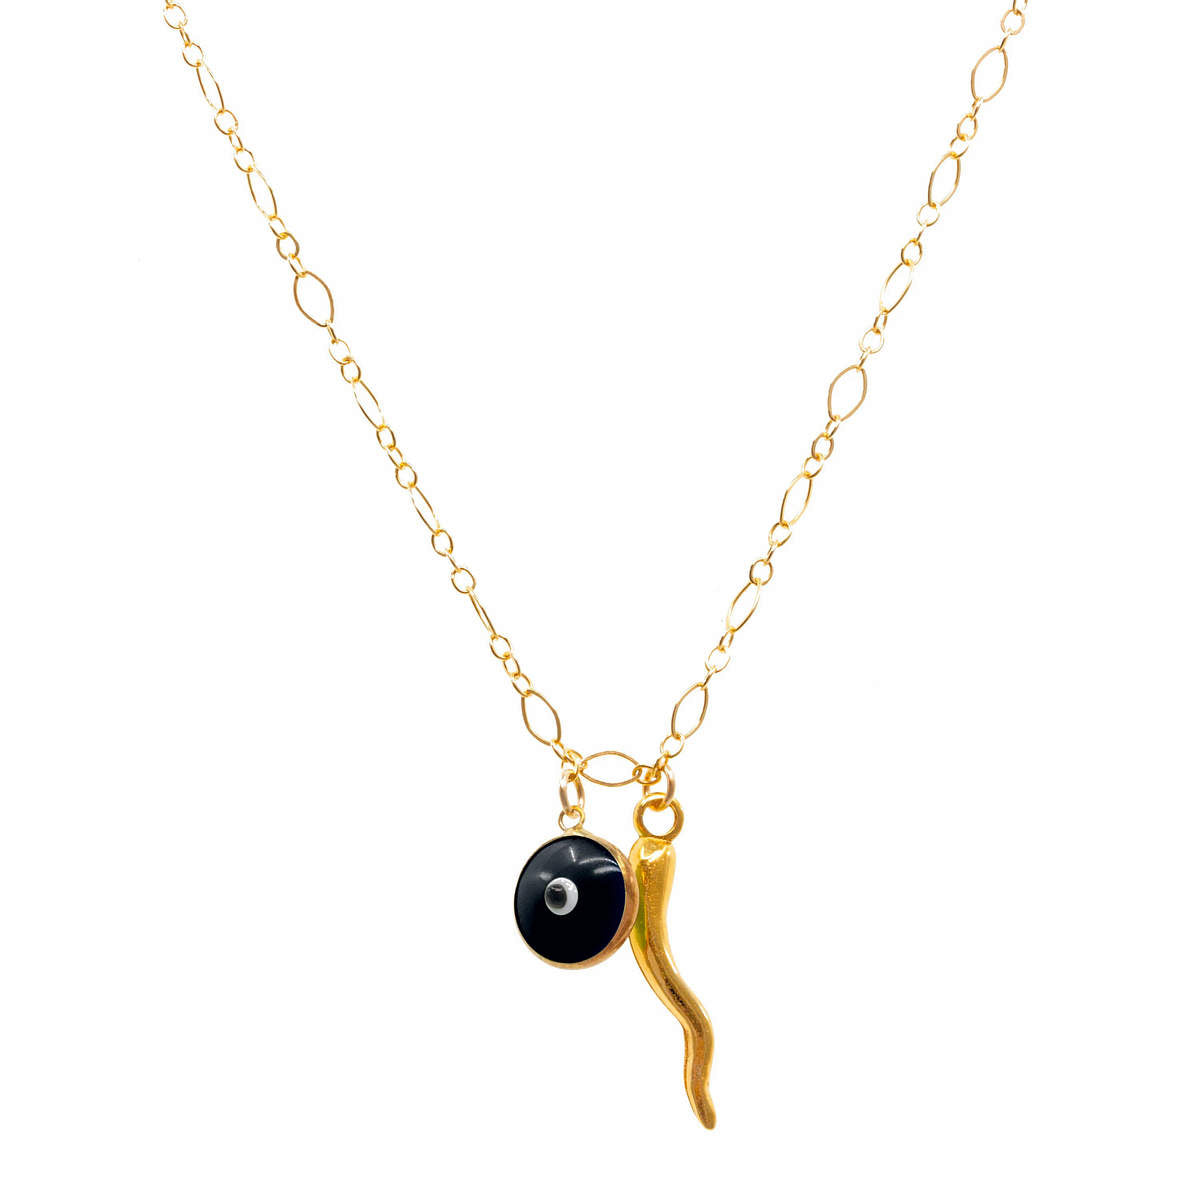 Double Dose Charm Necklace in Onyx